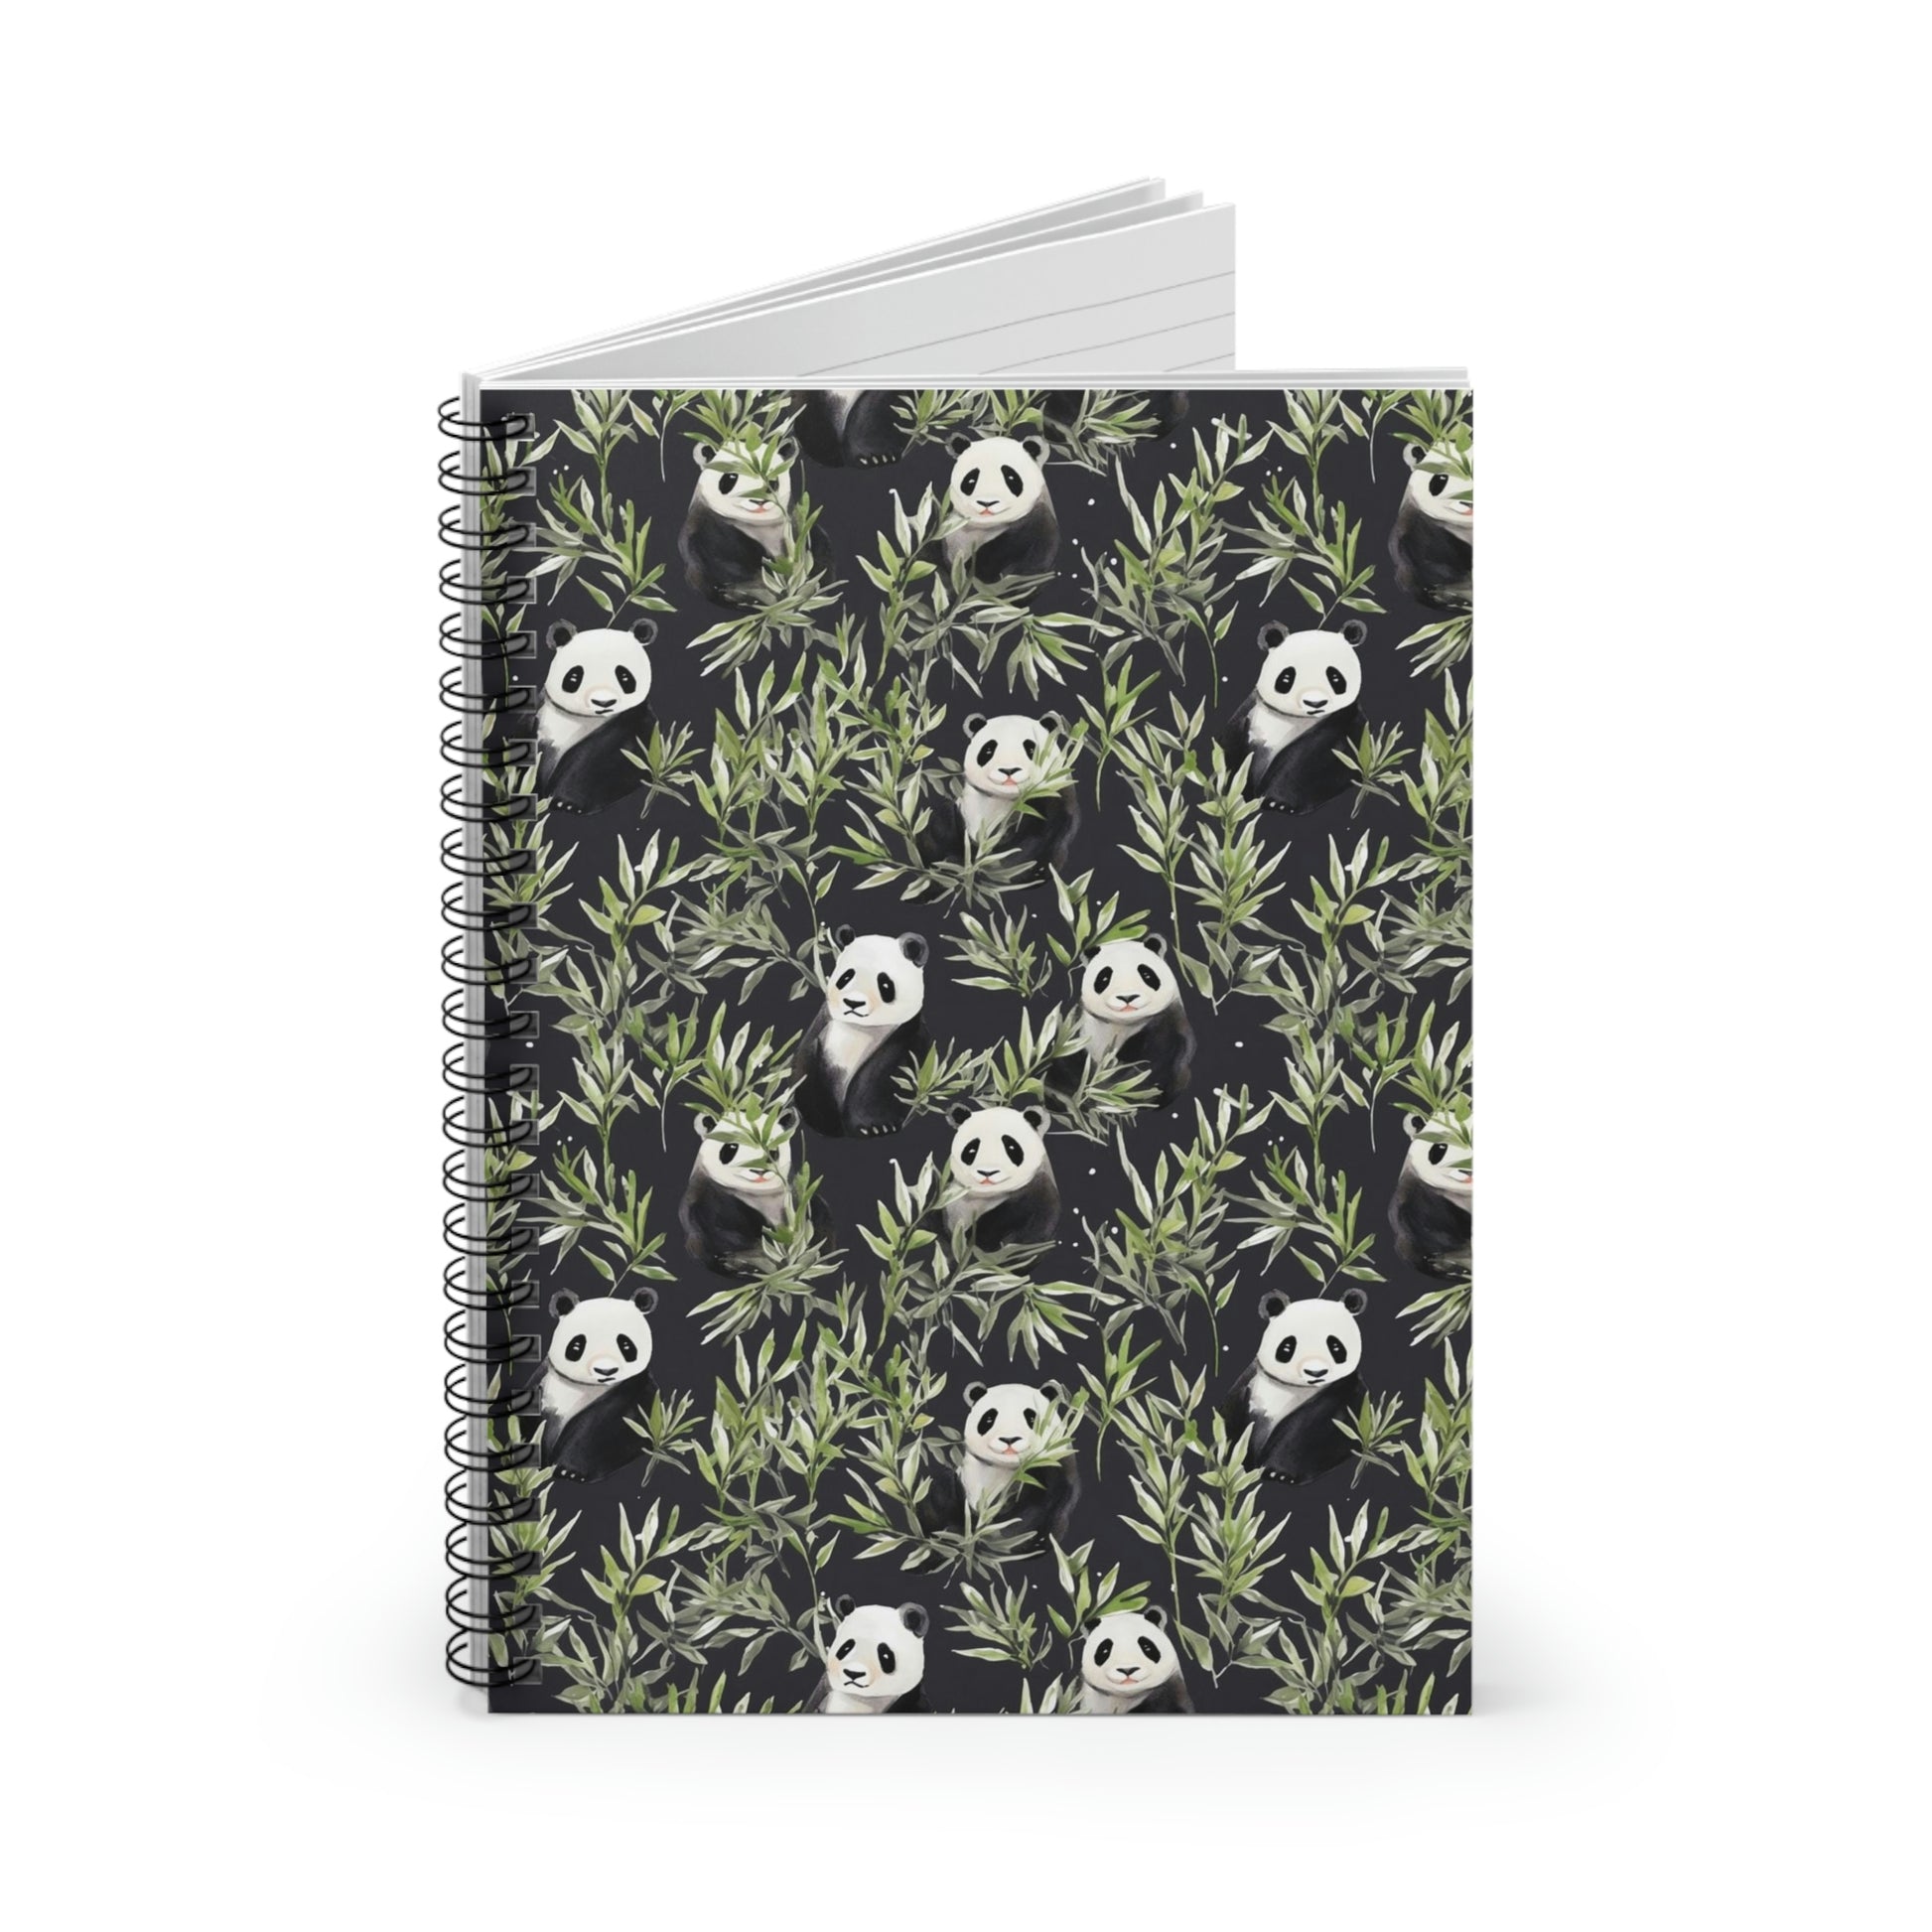 Panda Spiral Notebook, Bamboo Leaves Black Pattern Design Journal Traveler Notepad Ruled Line Book Paper Pad Work Aesthetic Starcove Fashion